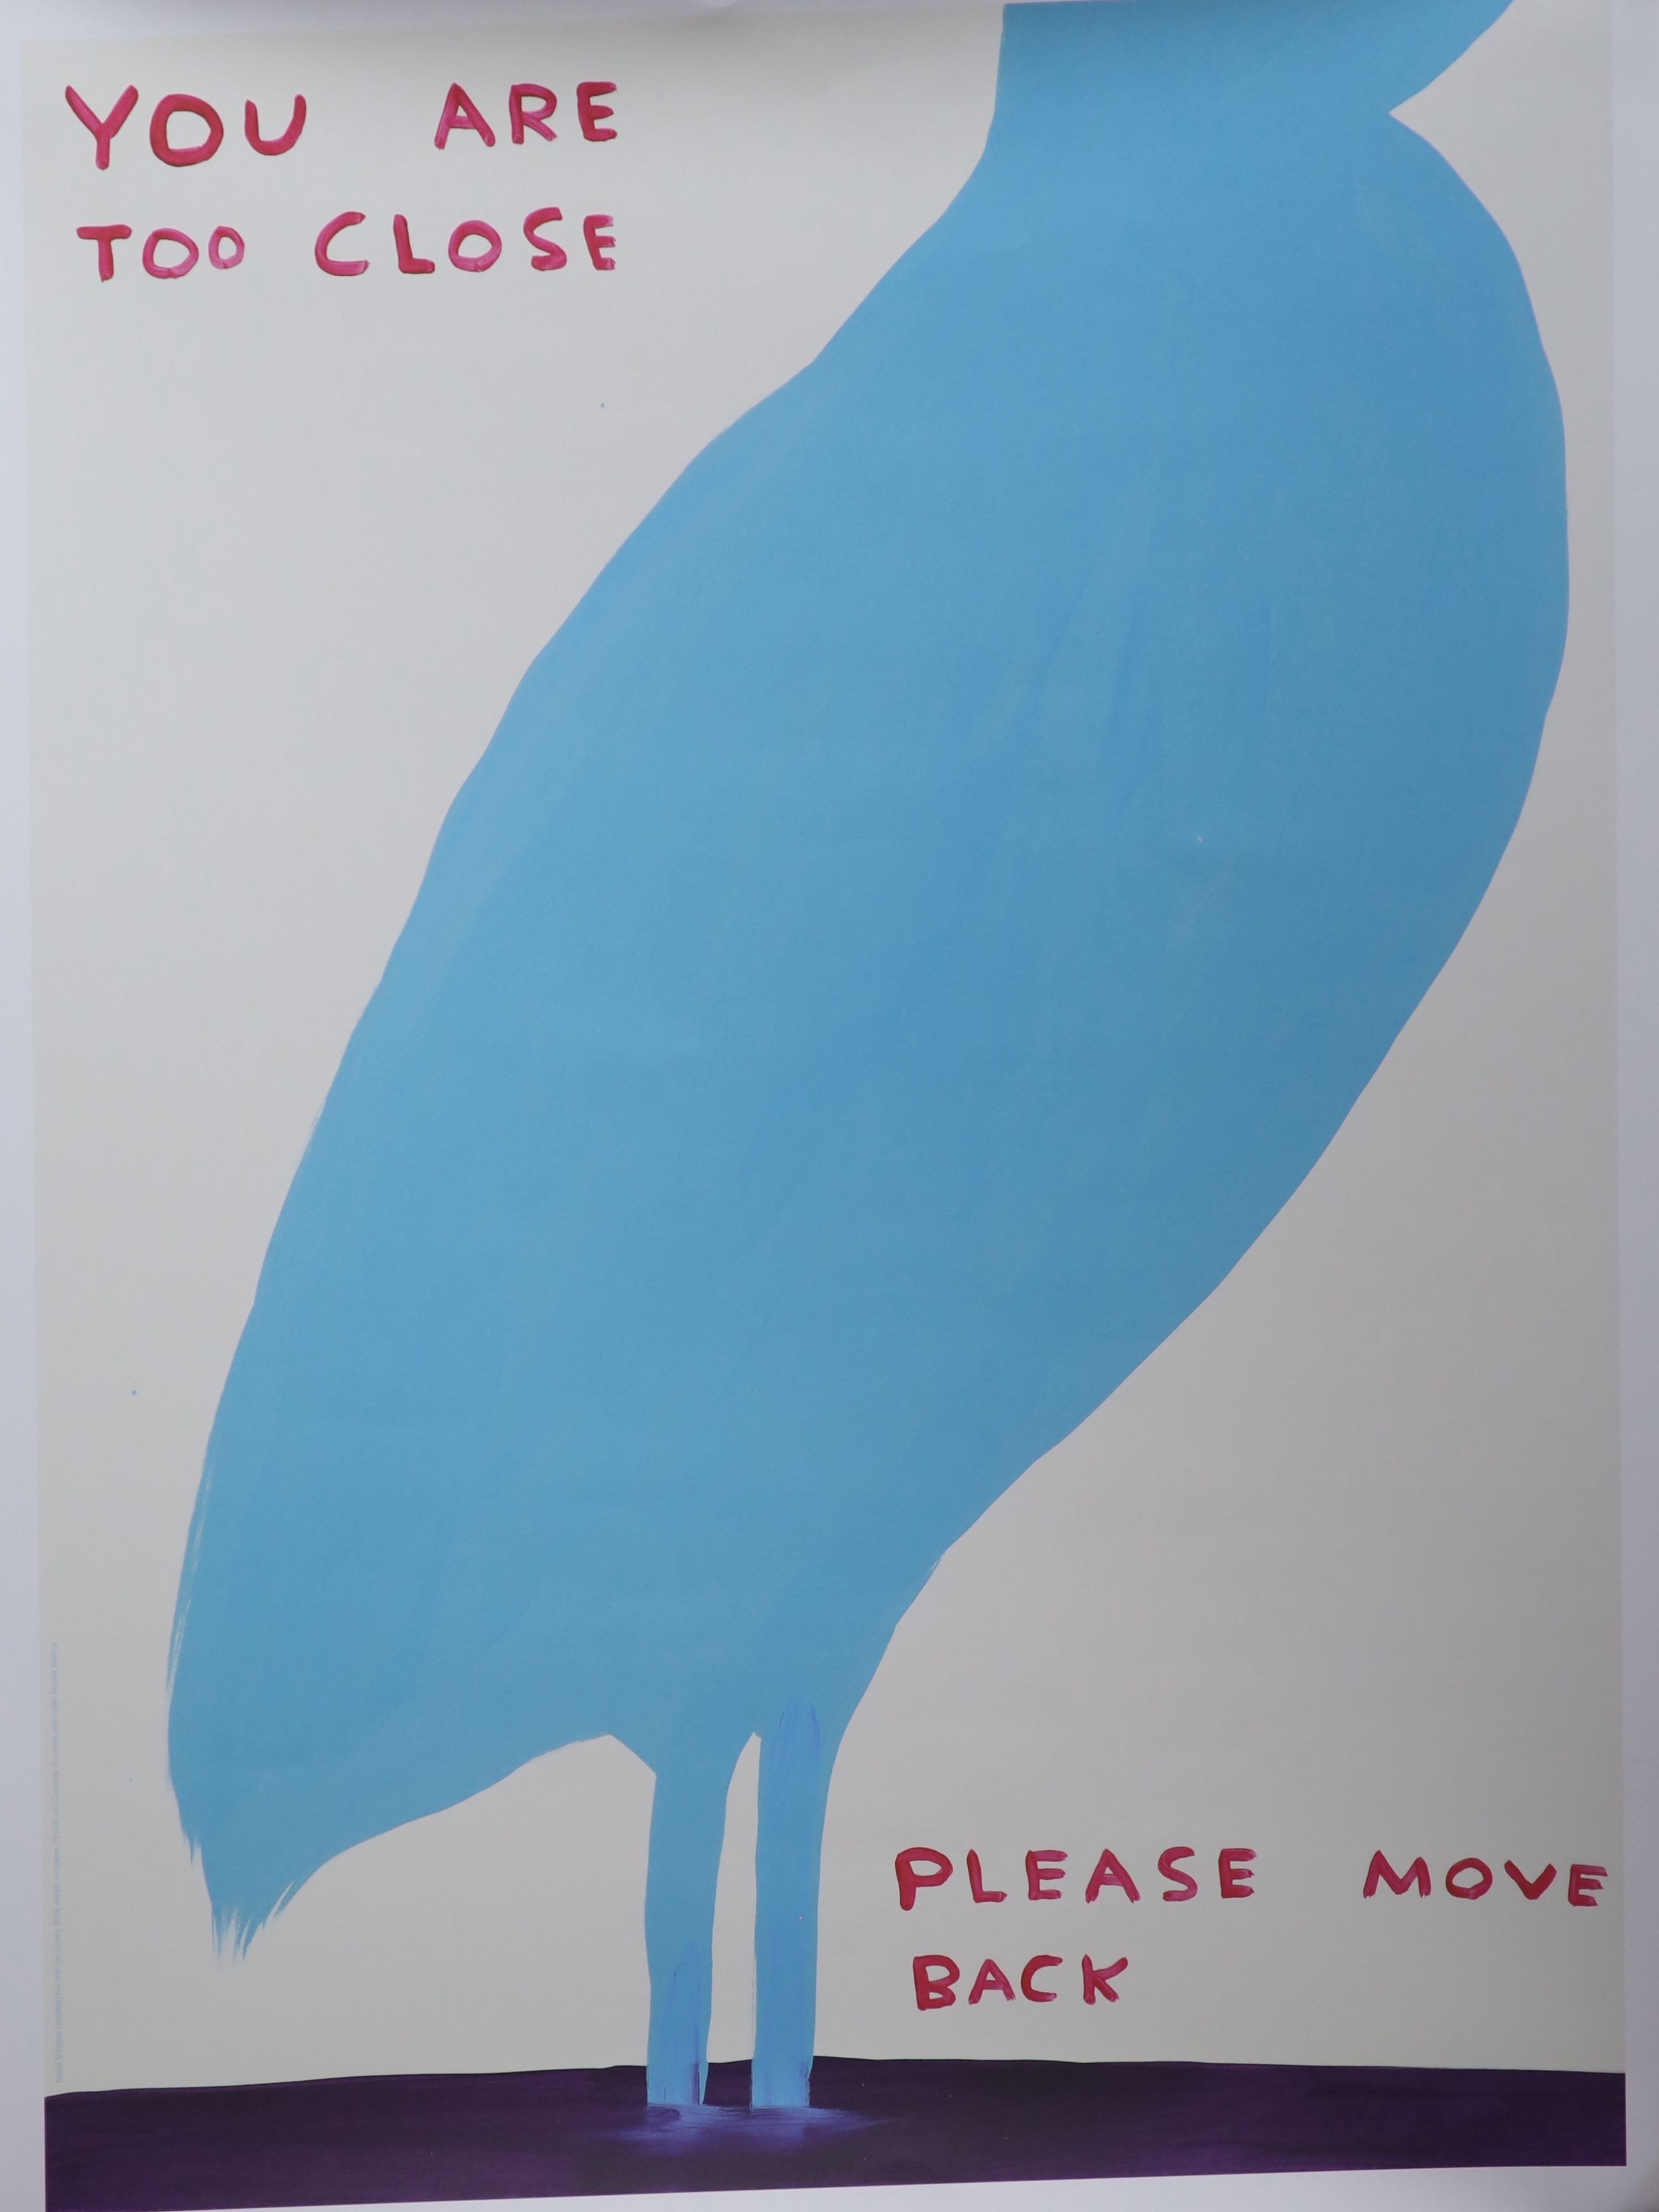 David Shrigley (1968-), offset lithographic poster, 'You Are Too Close, Please Move Back', 2020, 80 x 60cm.